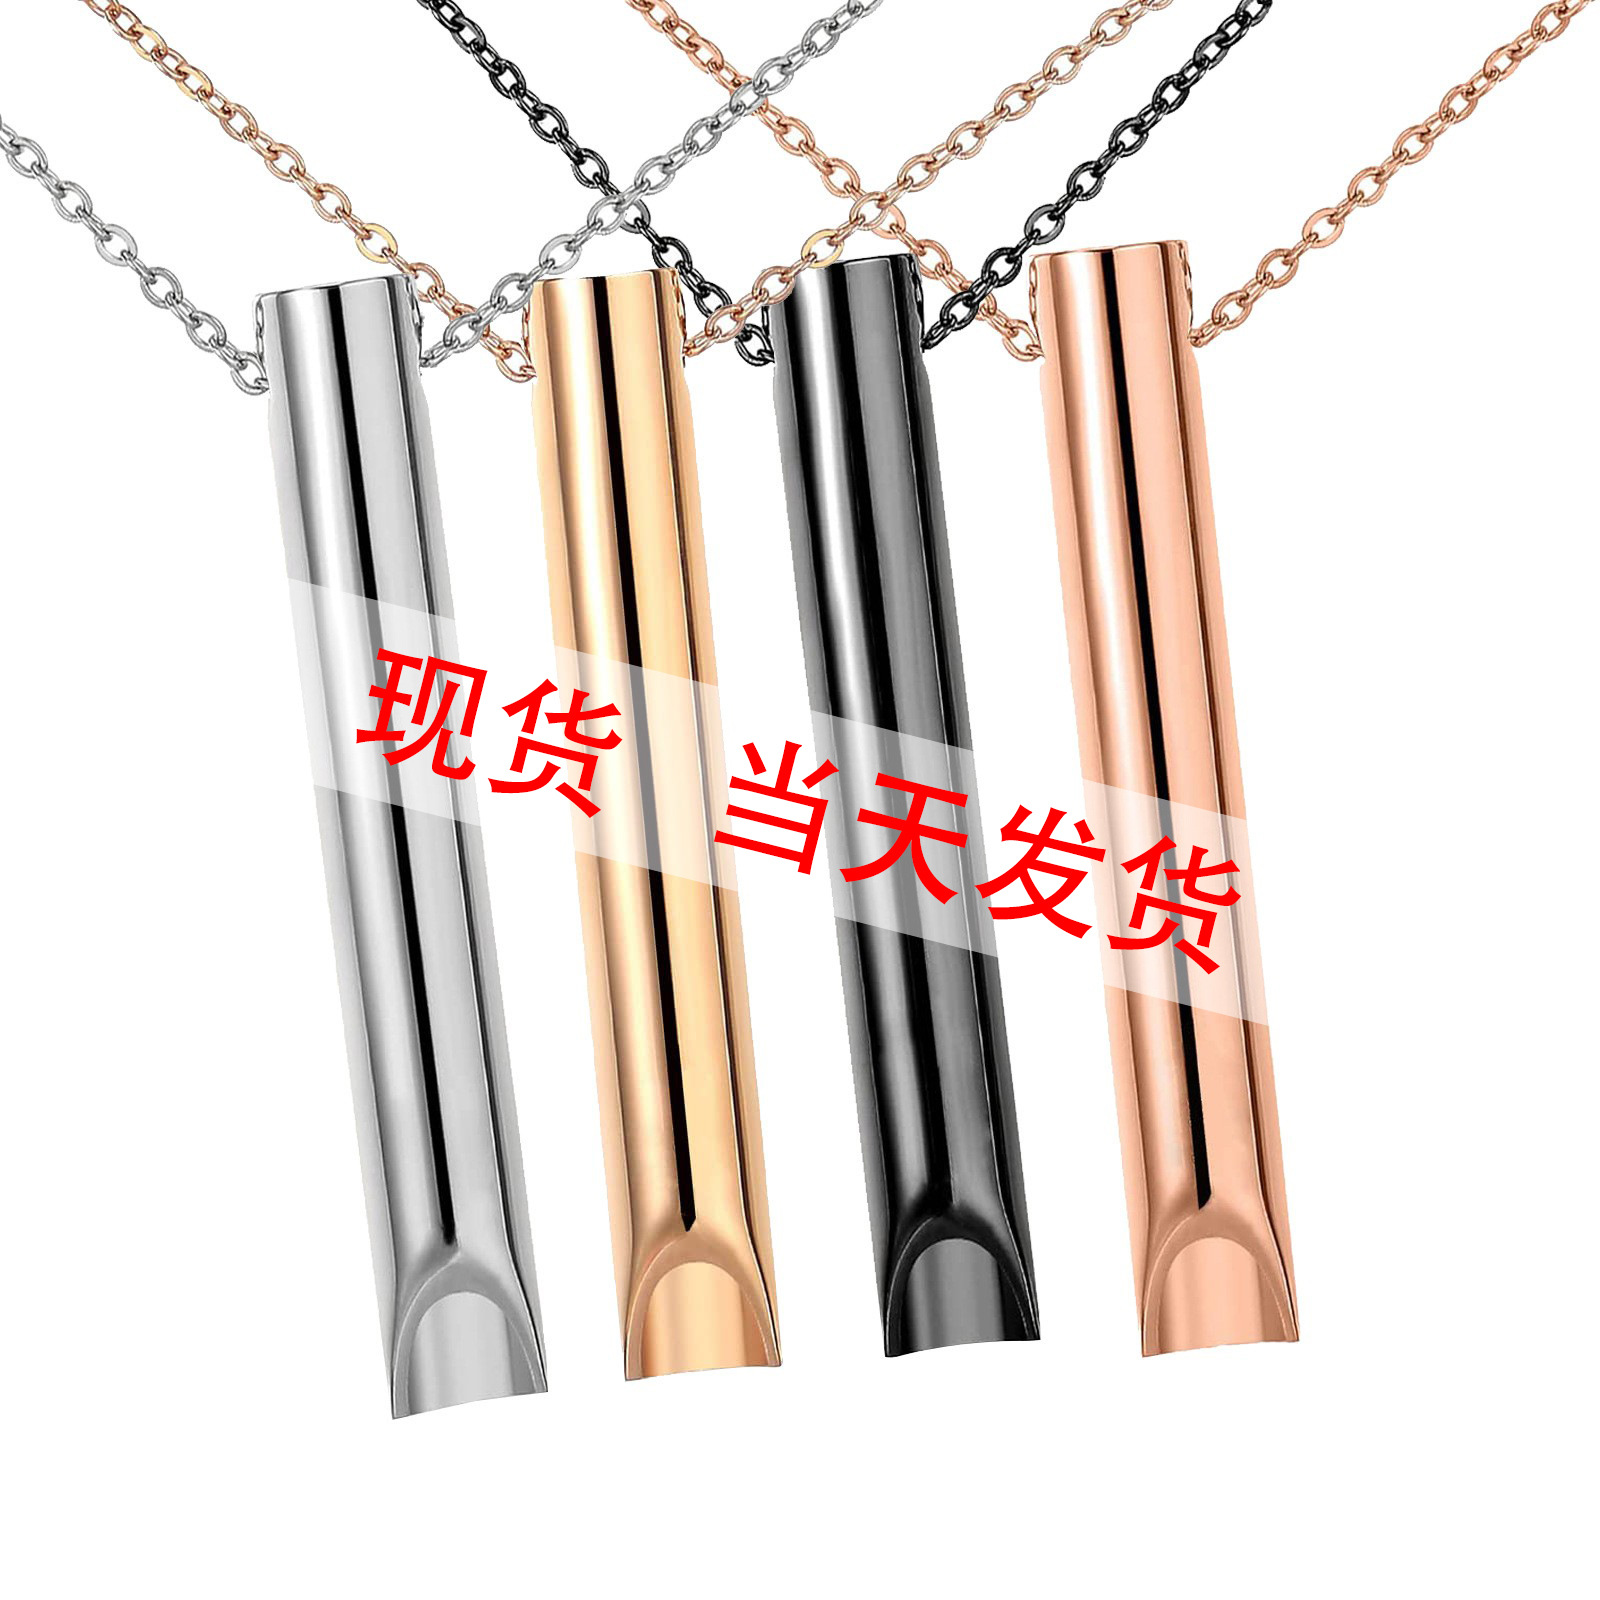 Best Seller in Europe and America Stainless Steel Anxiety Relief Mind Breathing Tool Meditation Relaxation Calm Three-Dimensional Can Carve Writing Necklace